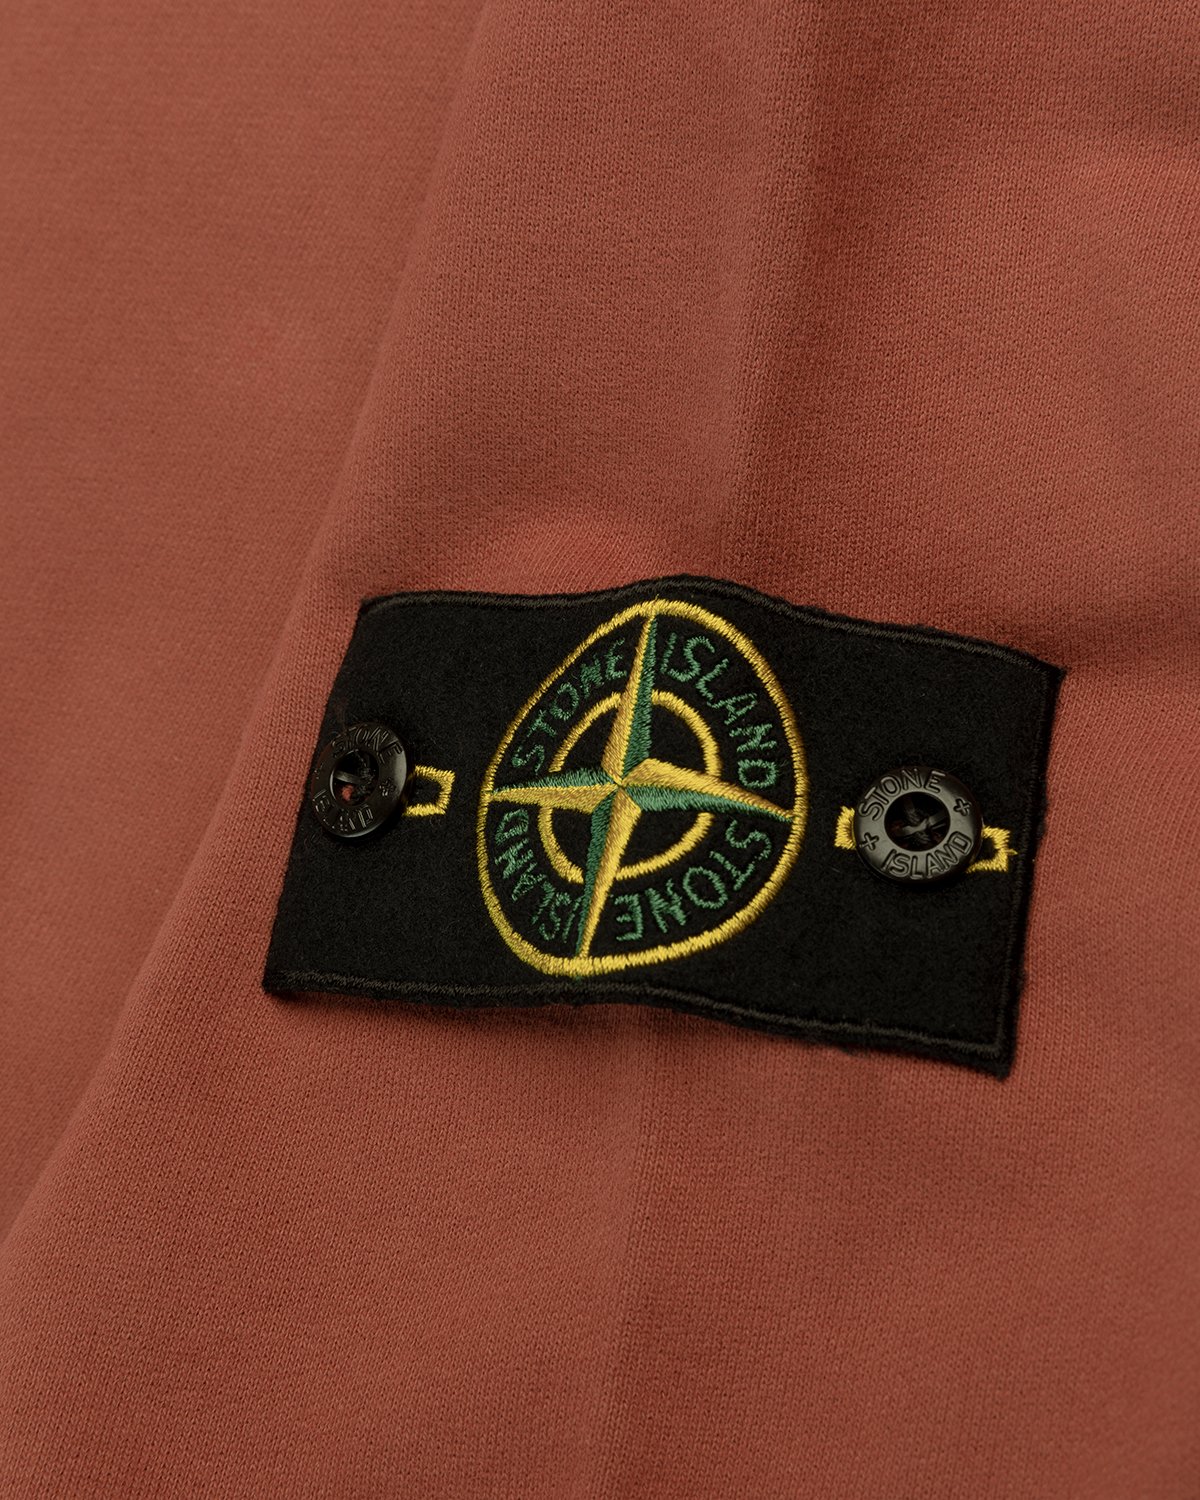 Stone Island - Dust Color Treatment Hoodie Brick Red - Clothing - Red - Image 4